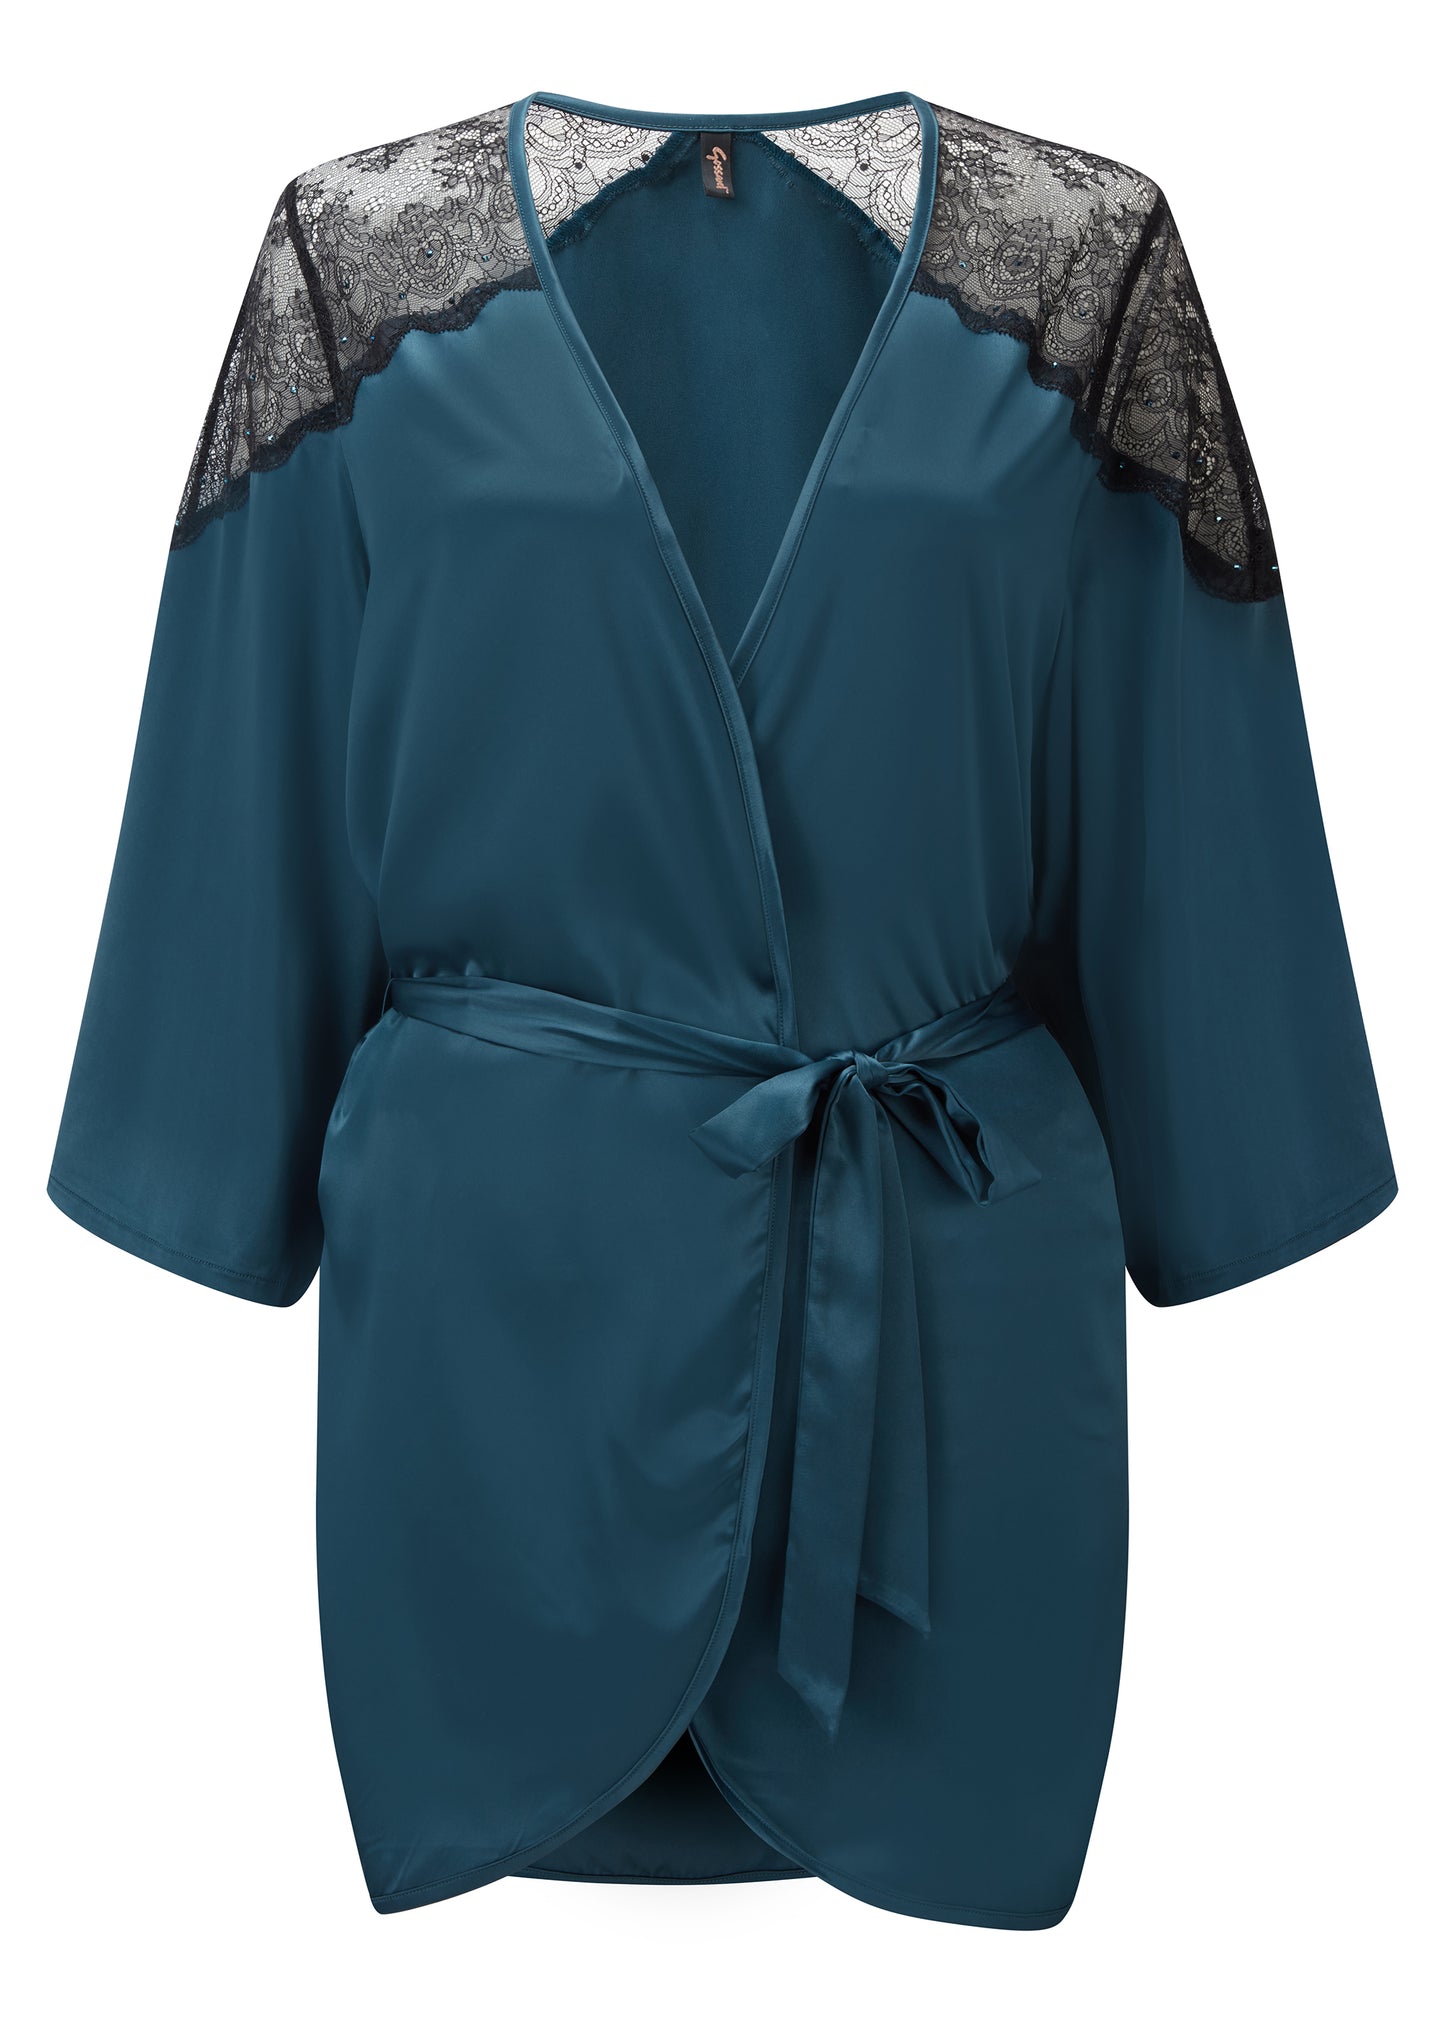 VIP Confession Satin Robe in Teal/Black By Gossard - XS-XL